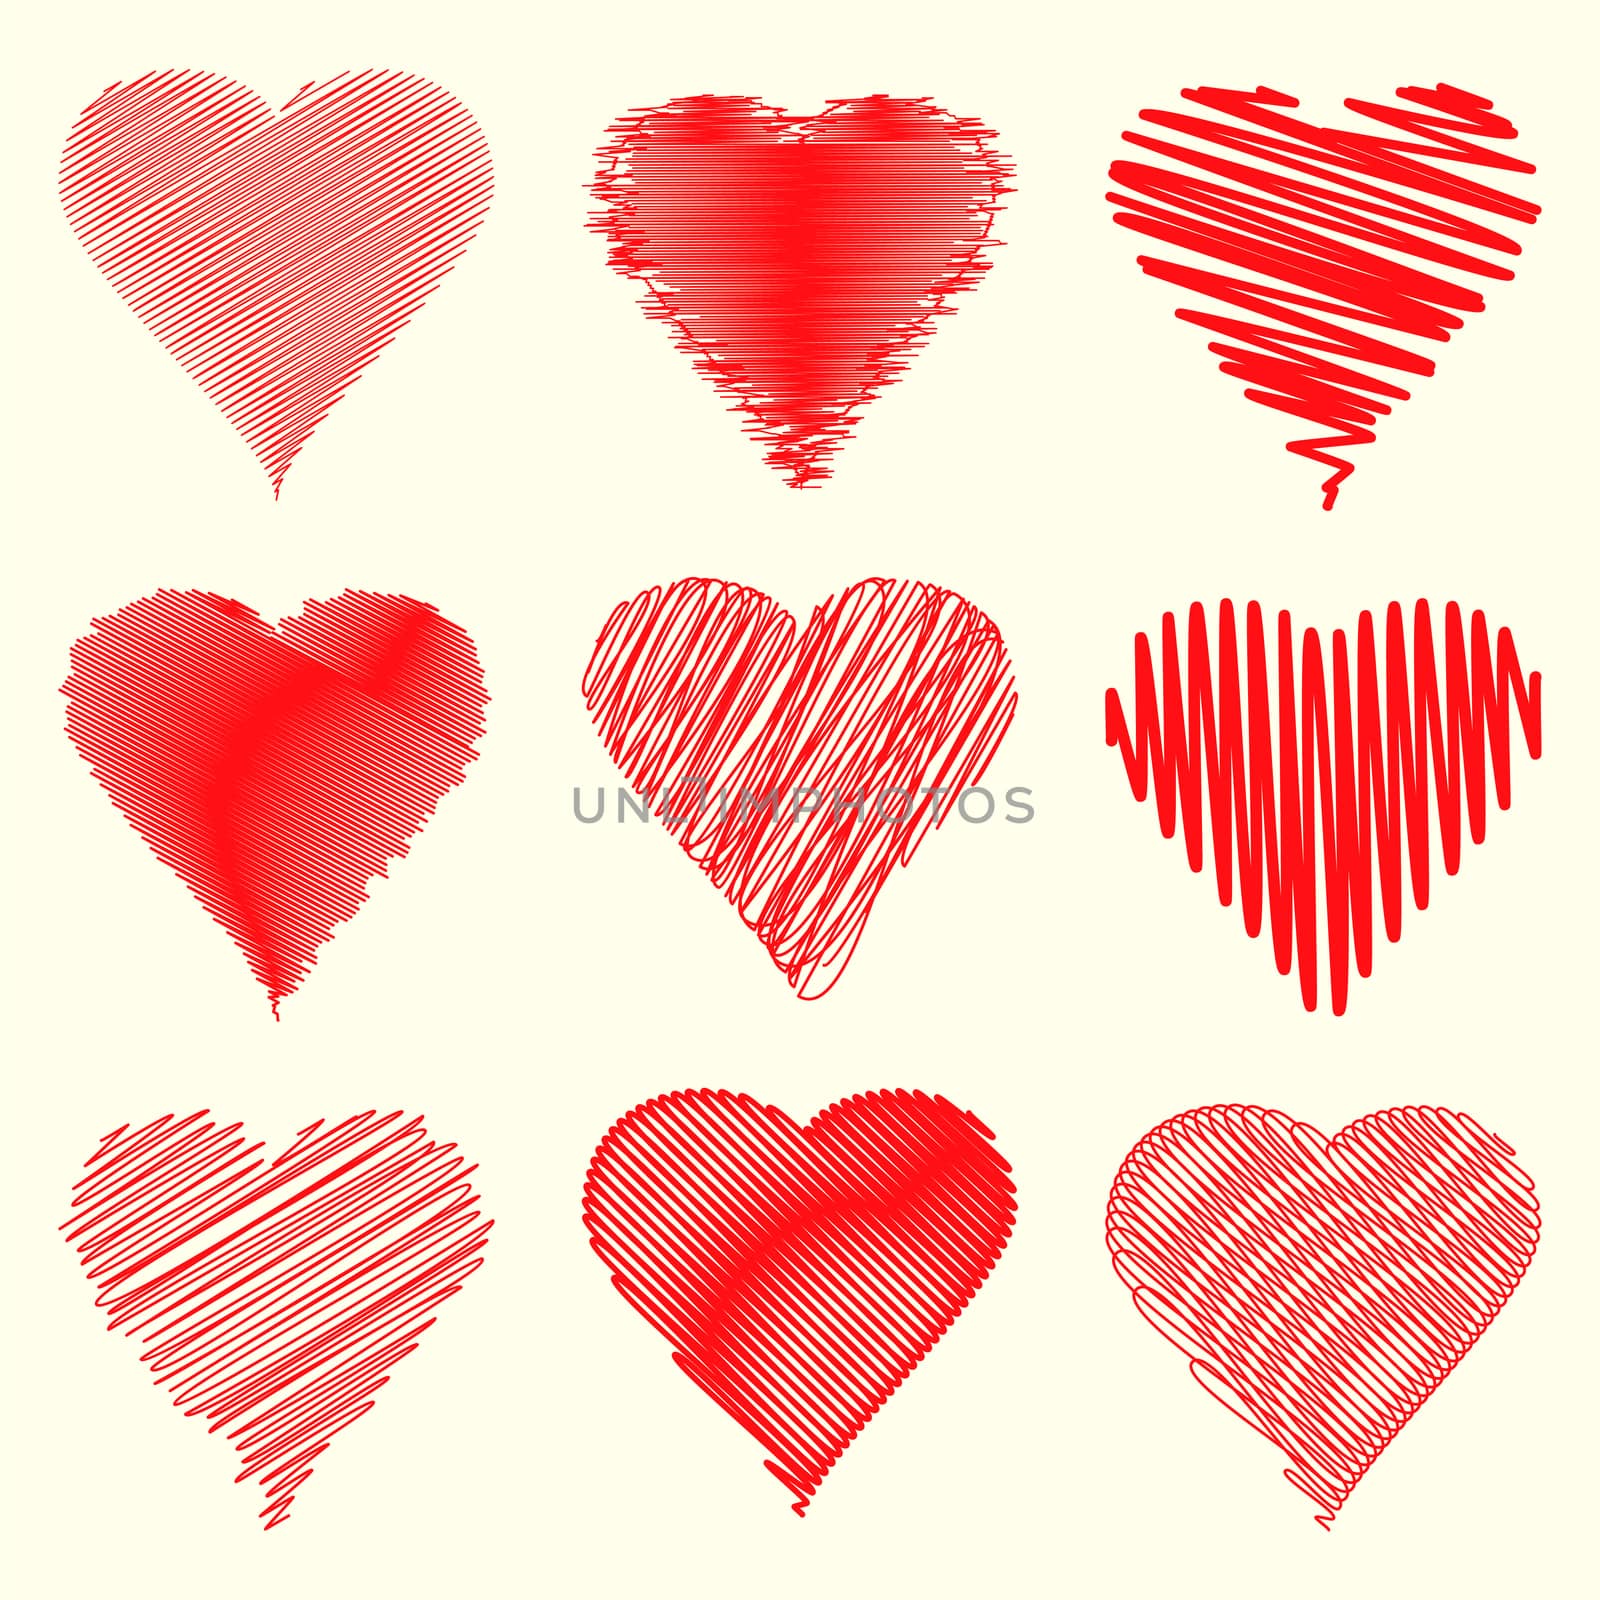 Nine different heart shapes collection specially for valentines day by Adamchuk